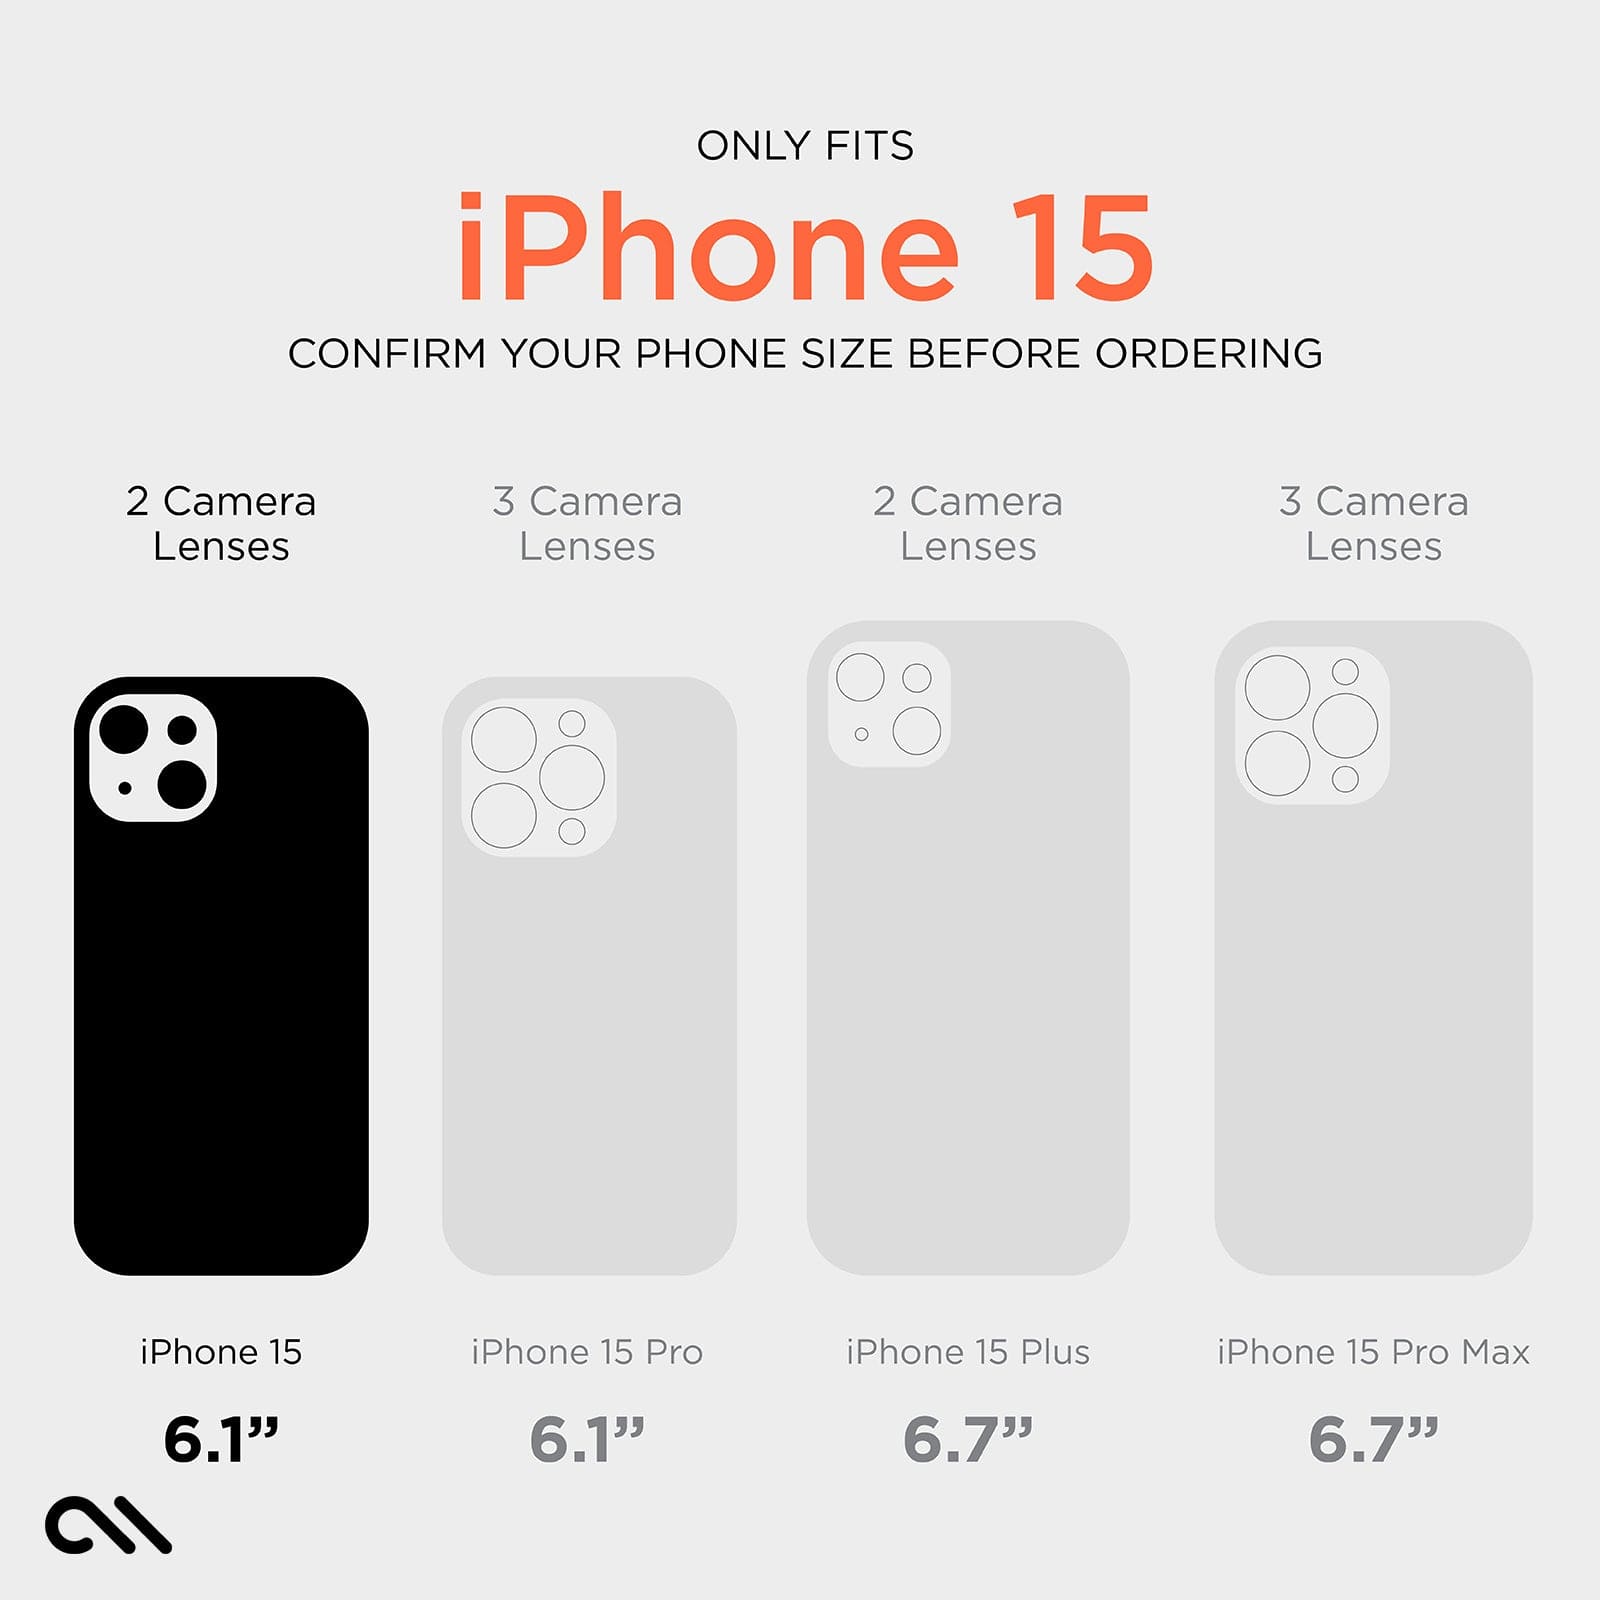 ONLY FITS IPHONE 15. CONFIRM YOUR PHONE SIZE BEFORE ORDERING